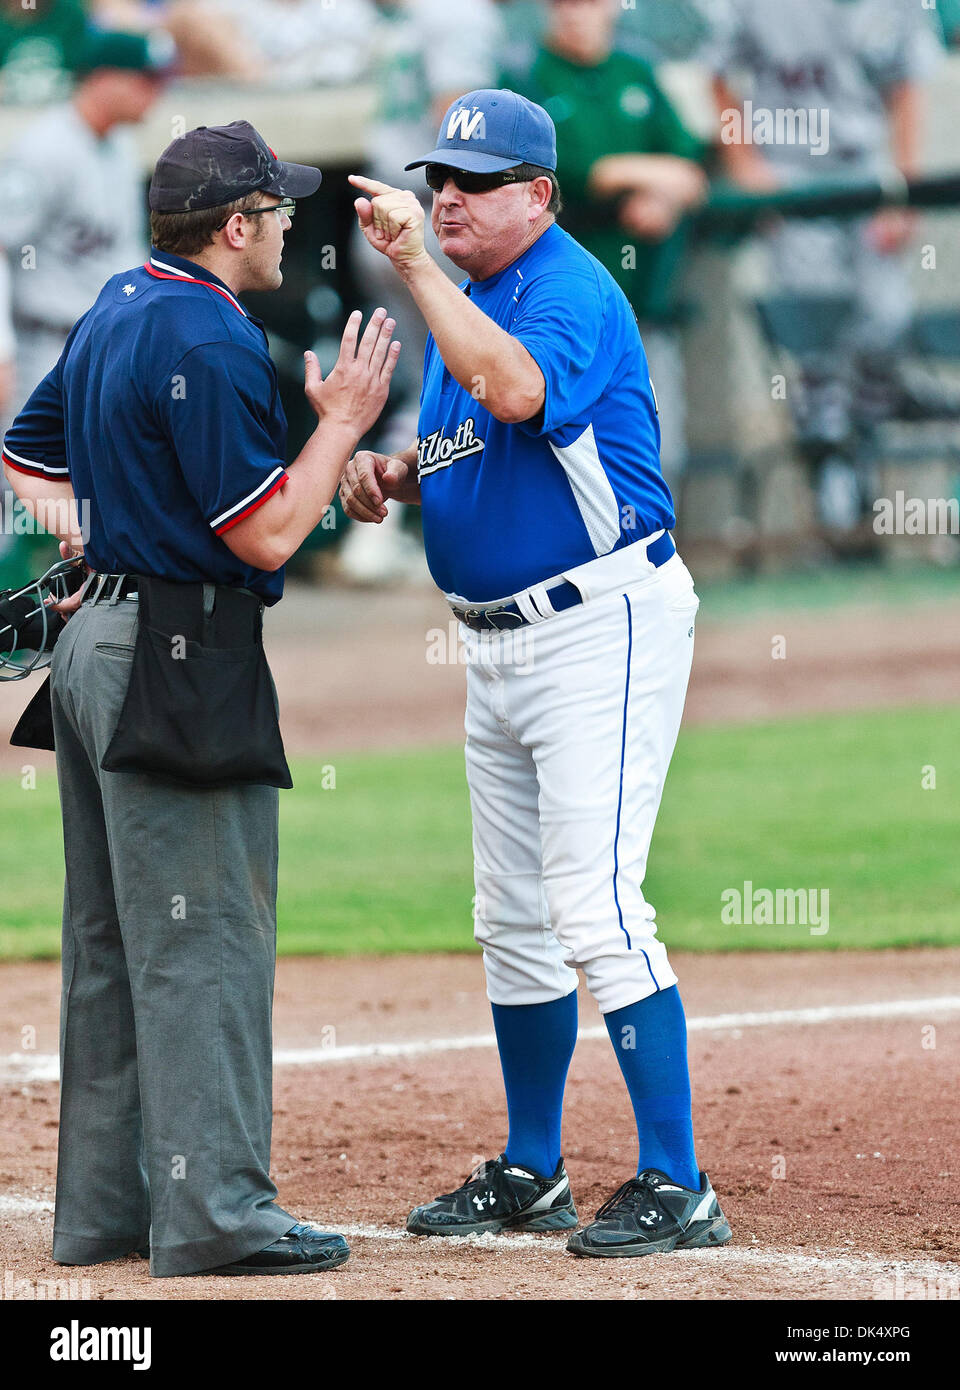 July 19, 2011 - Fort Worth, Texas, U.S - Fort Worth Cats Manager, Stan Hough, has a disagreement with home plate umpire, Shaylor Smith, during the American Association of Independant Professional Baseball game between the Gary Southshore Railcats and the Fort Worth Cats at the historic LaGrave Baseball Field in Fort Worth, Tx. Gary Southshore defeats Fort Worth 7 to 3. (Credit Imag Stock Photo